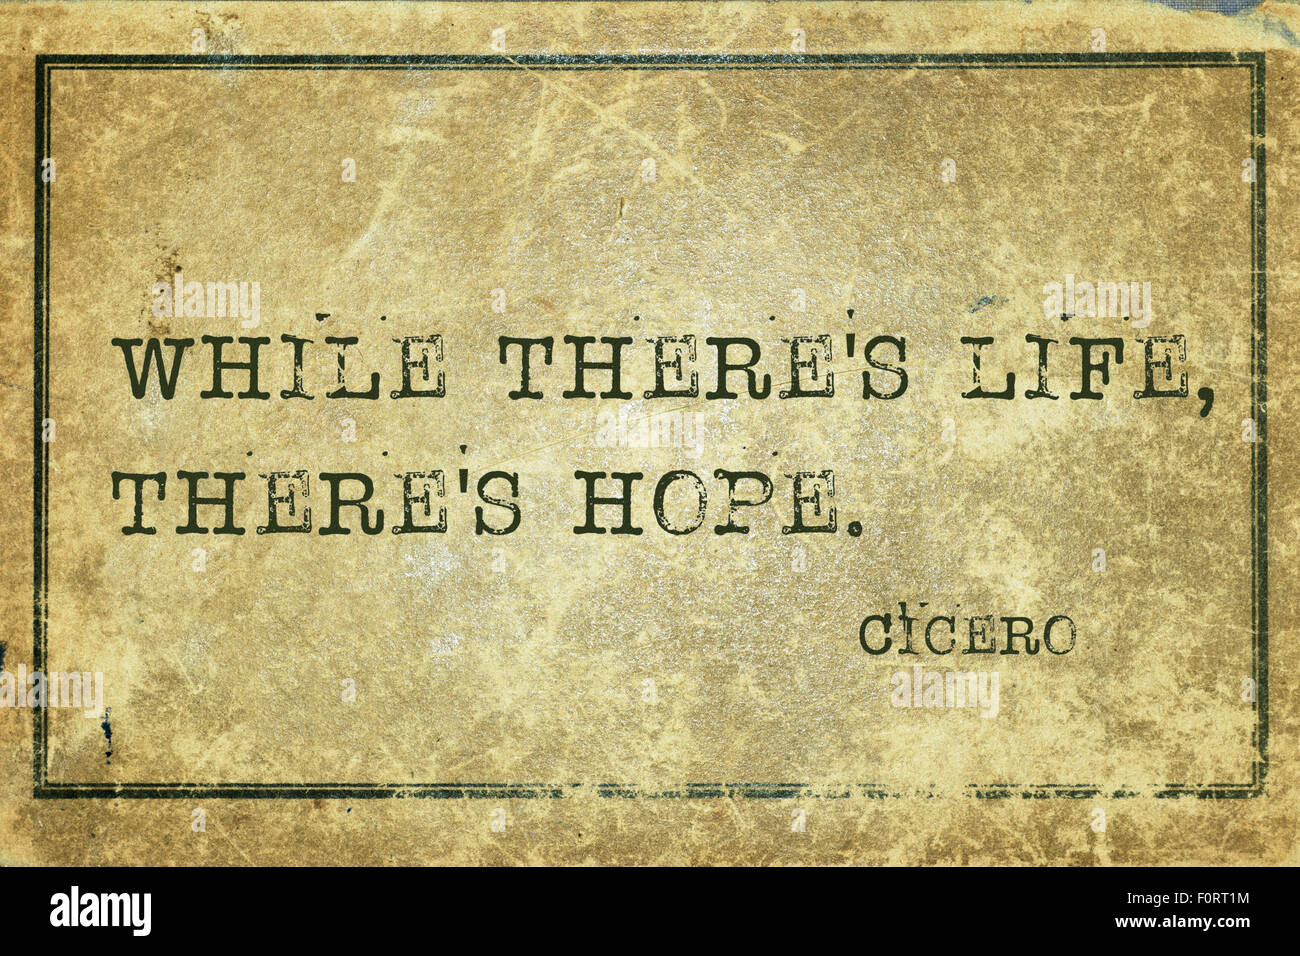 While there is Life, there is hope. Цицеро шрифт.